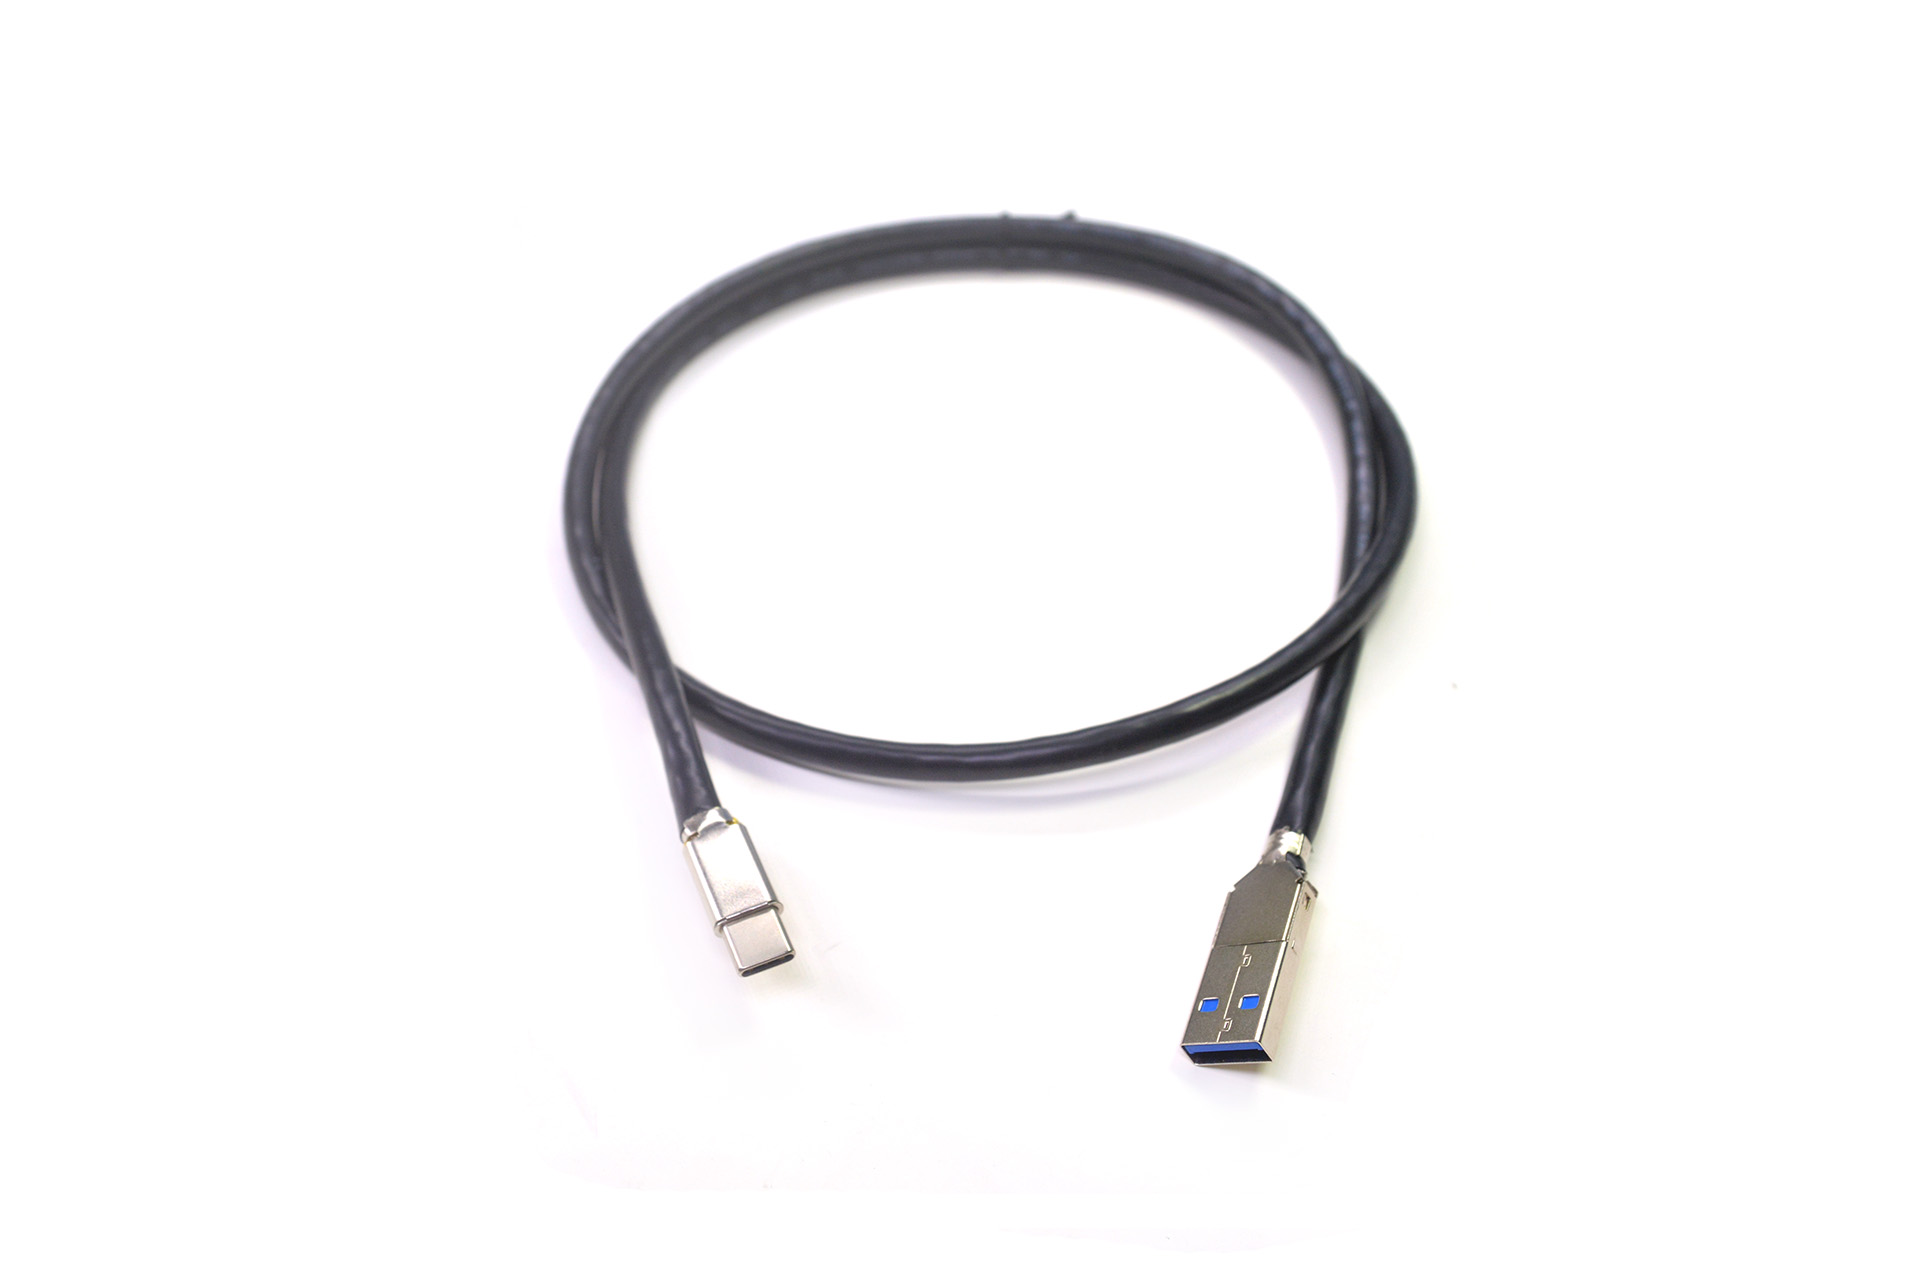 Cable sin moldear usb3 tipo – A a tipo – C